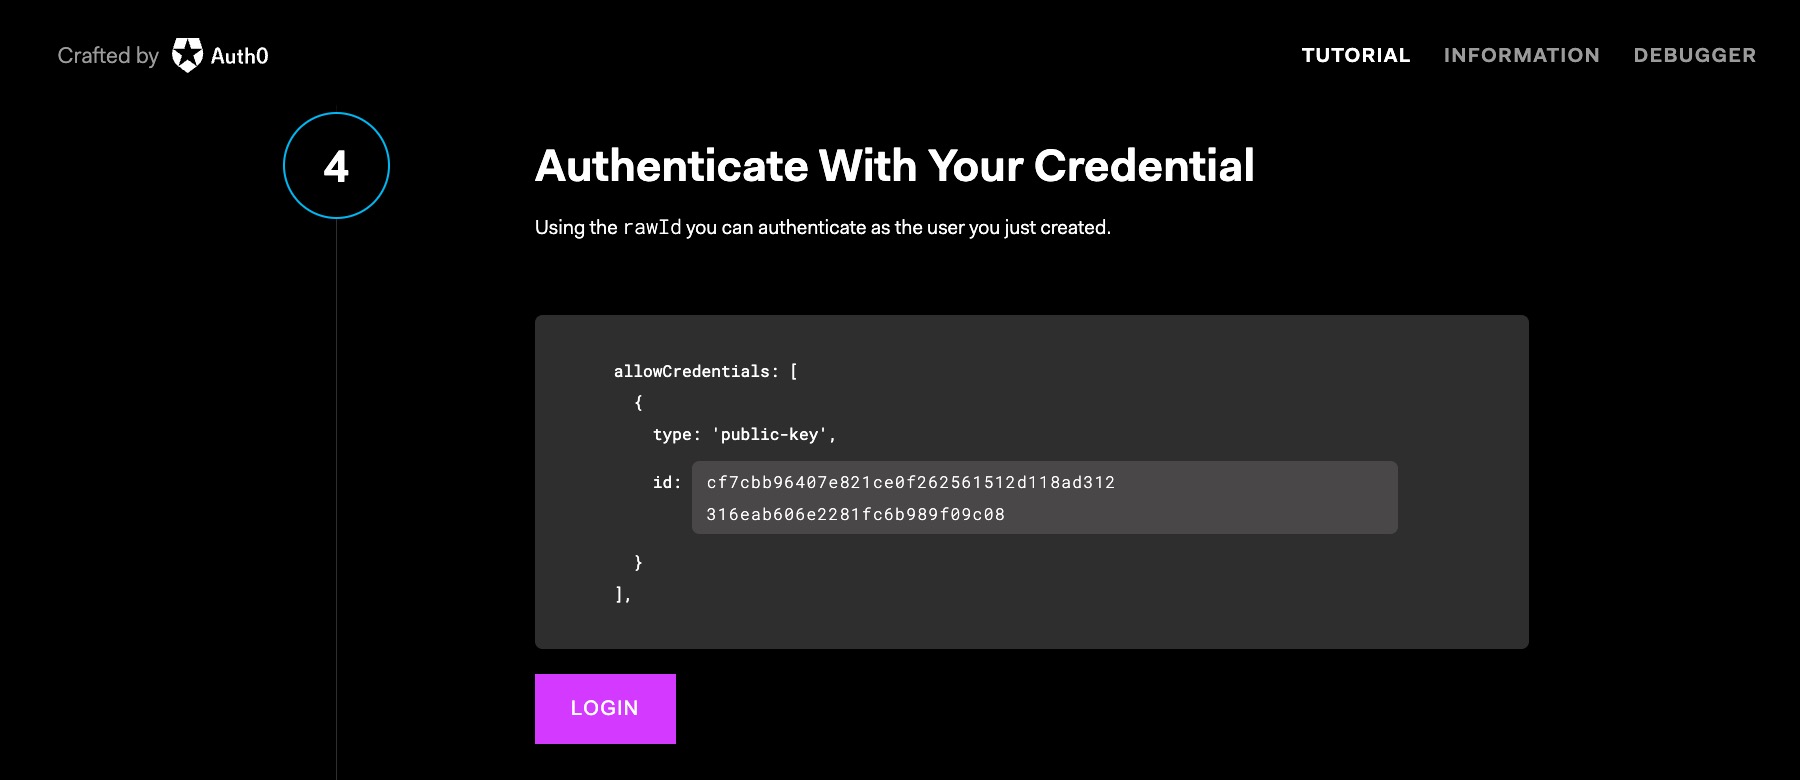 webauthn.io site authenticate user prompt from the browser